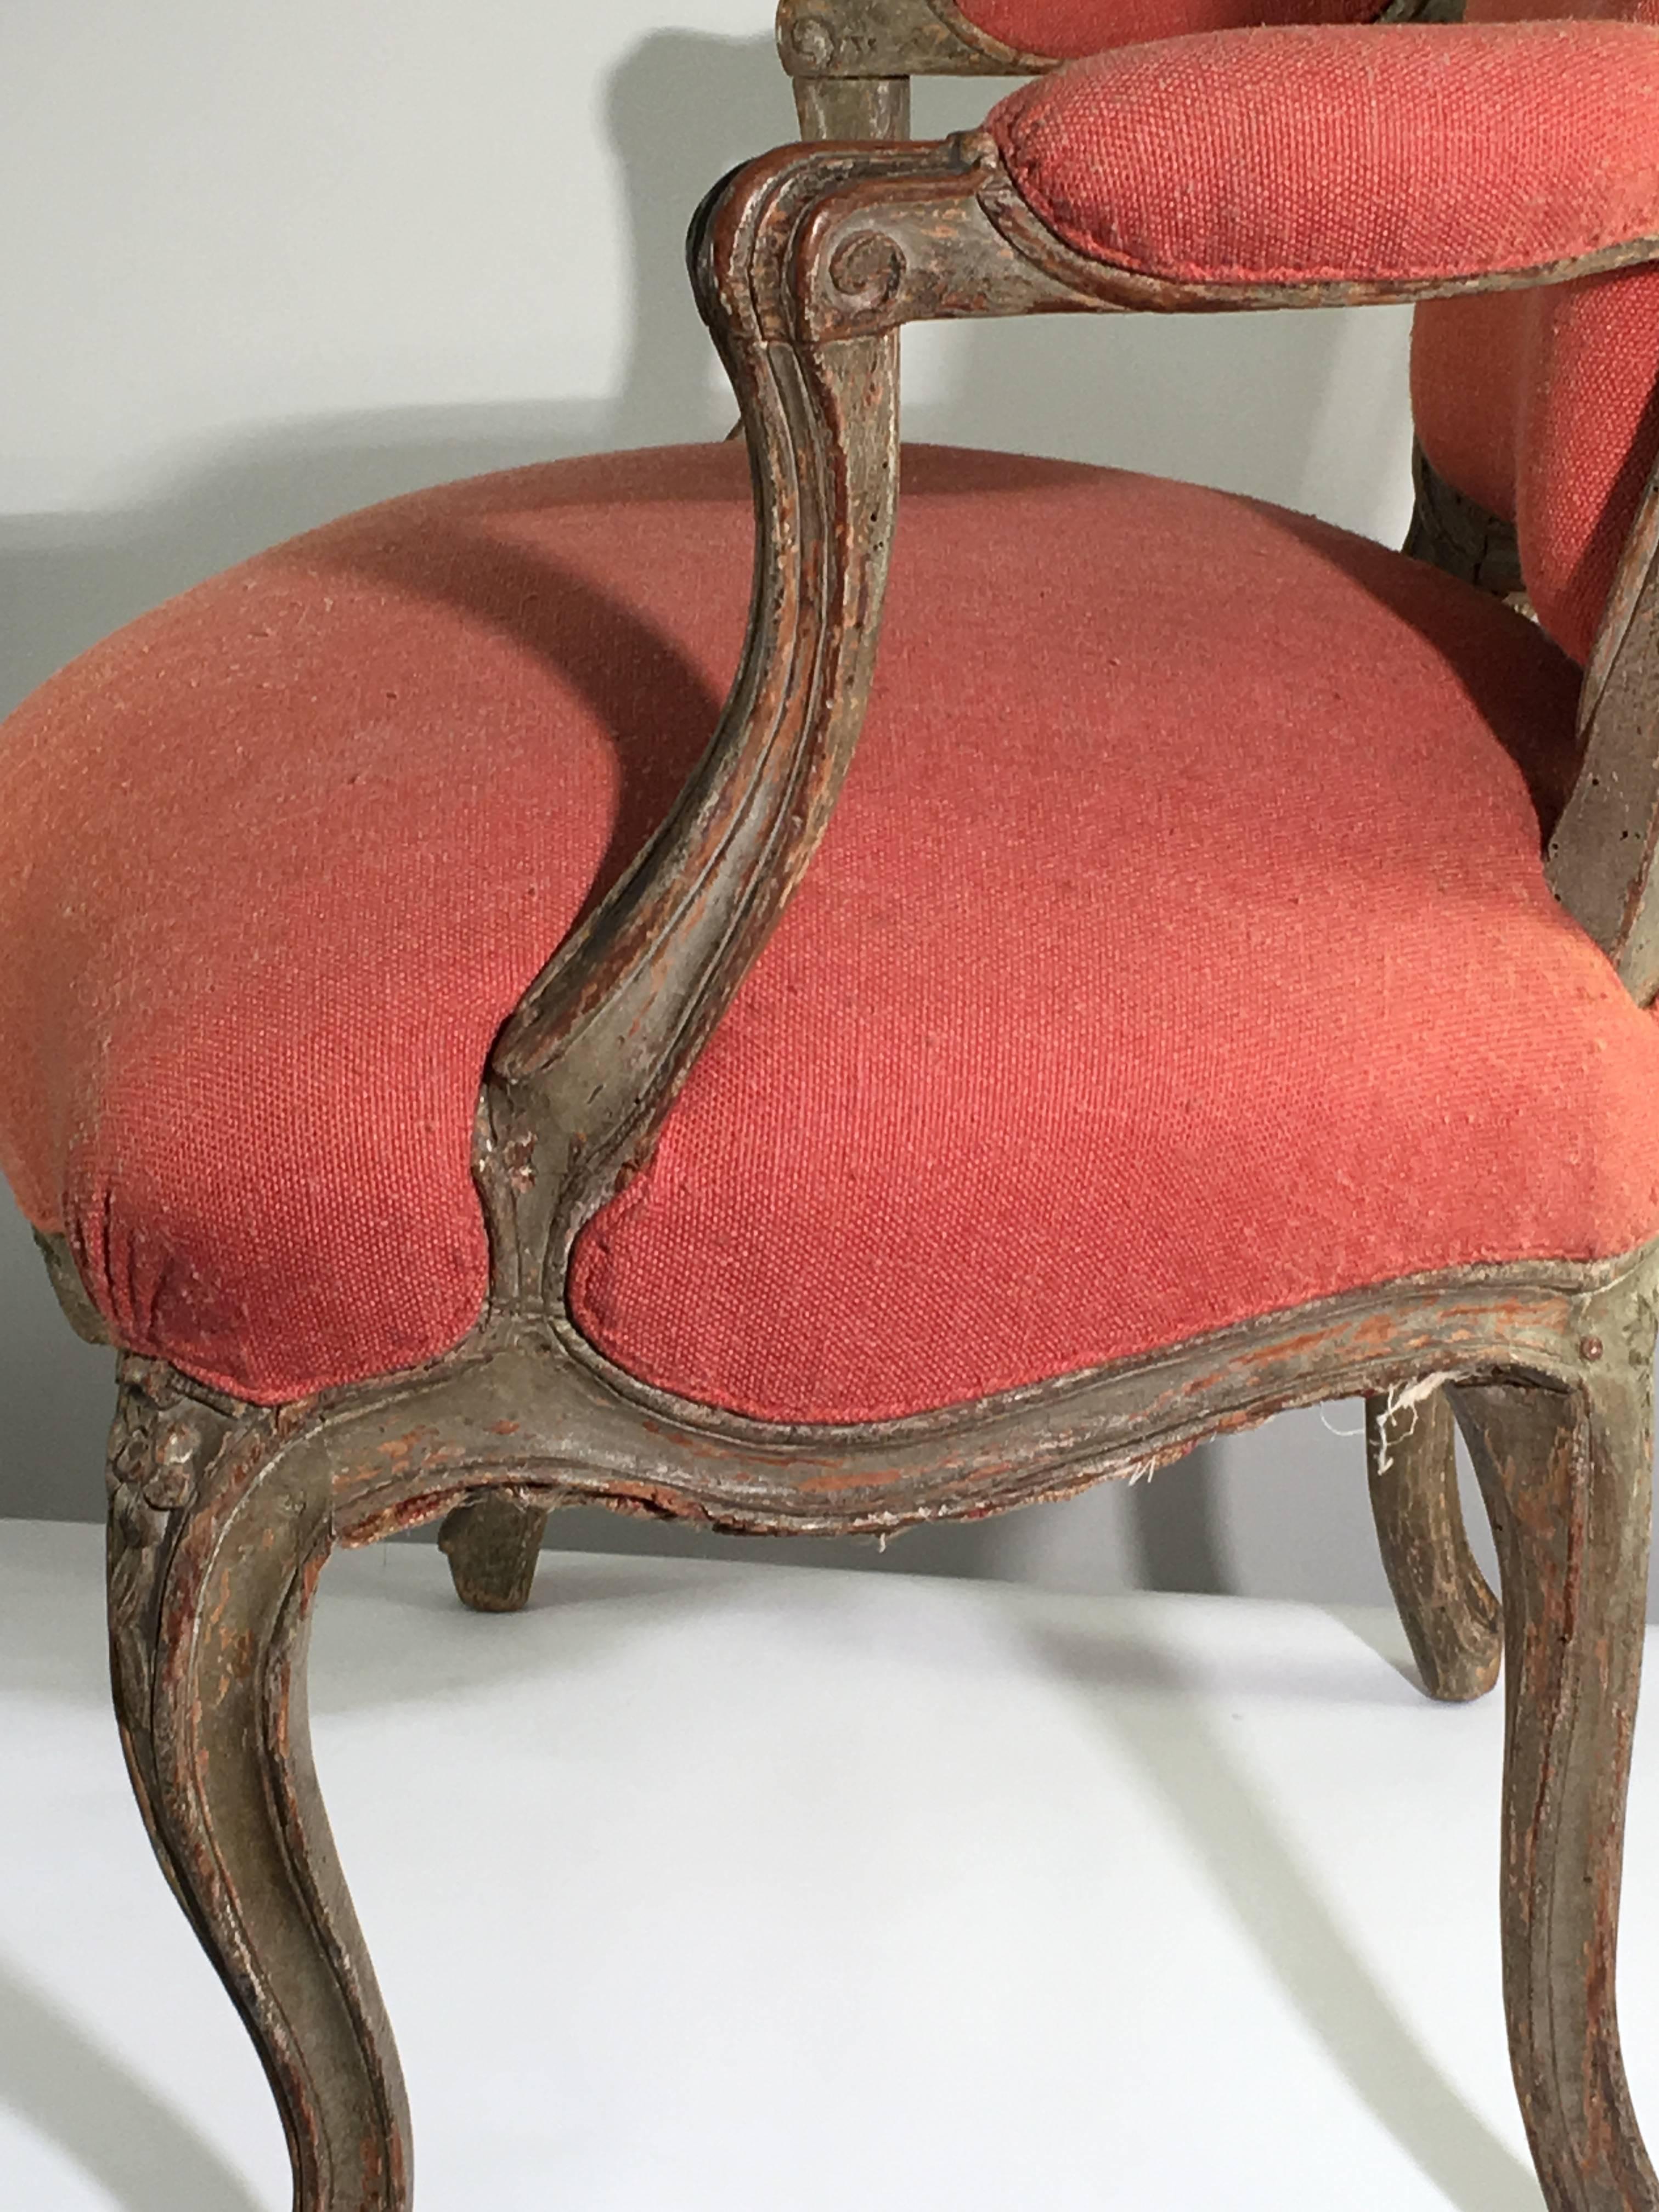 A late 18th century Louis XV armchair "fauteuil cabriolet" in original grey painted finish, currently upholstered in a coral red wool fabric. Nicely carved seat and back crest with well modeled arms.
A nice size not too small.